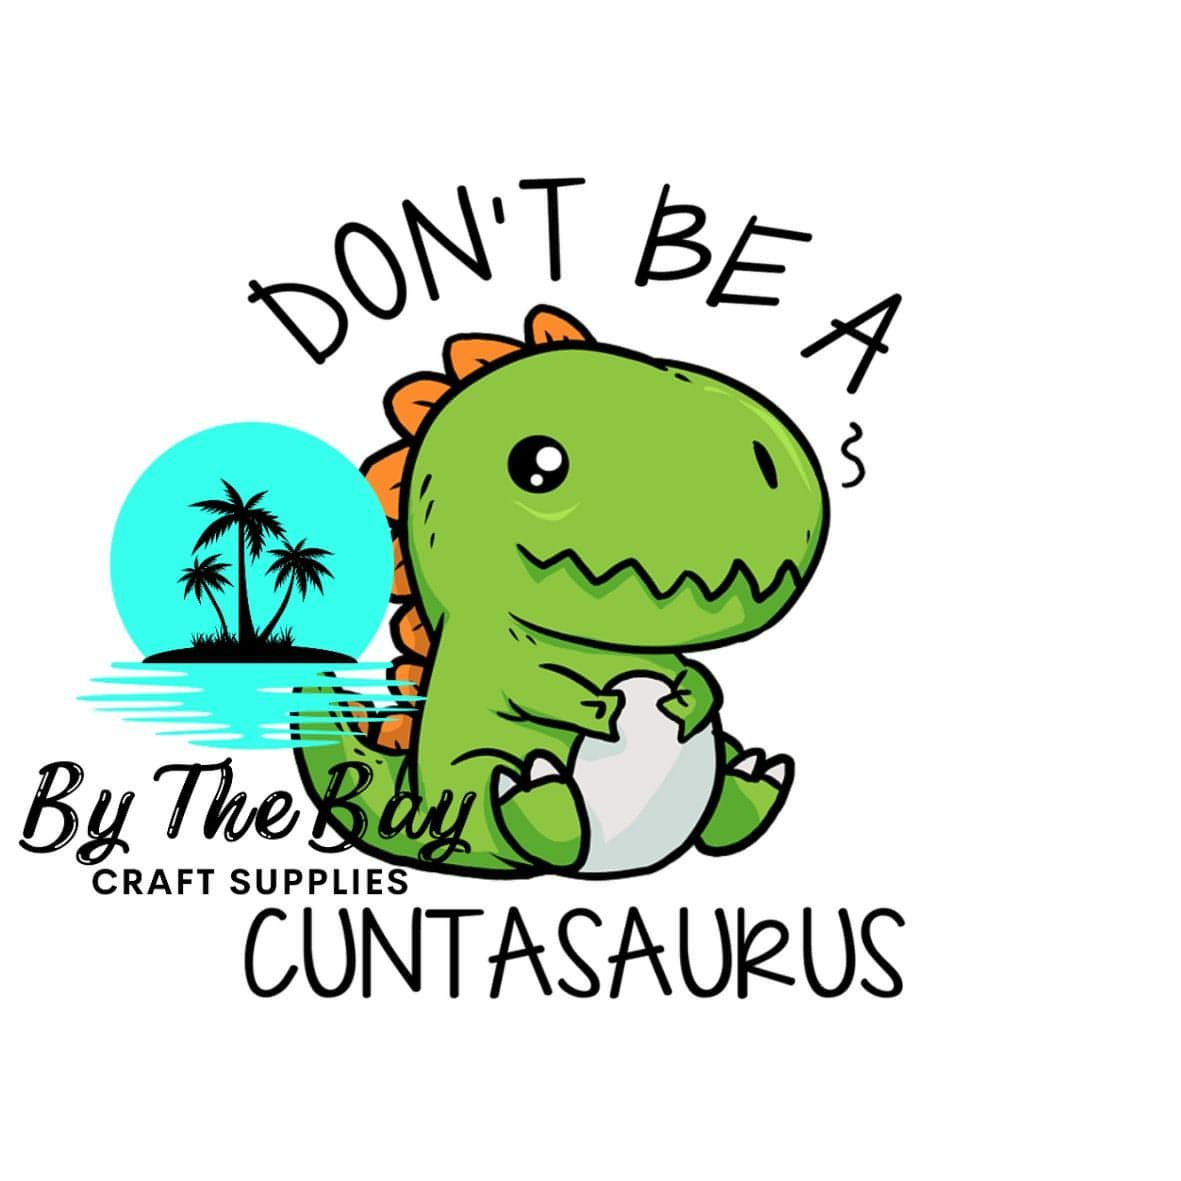 Don't be a C**tasaurus